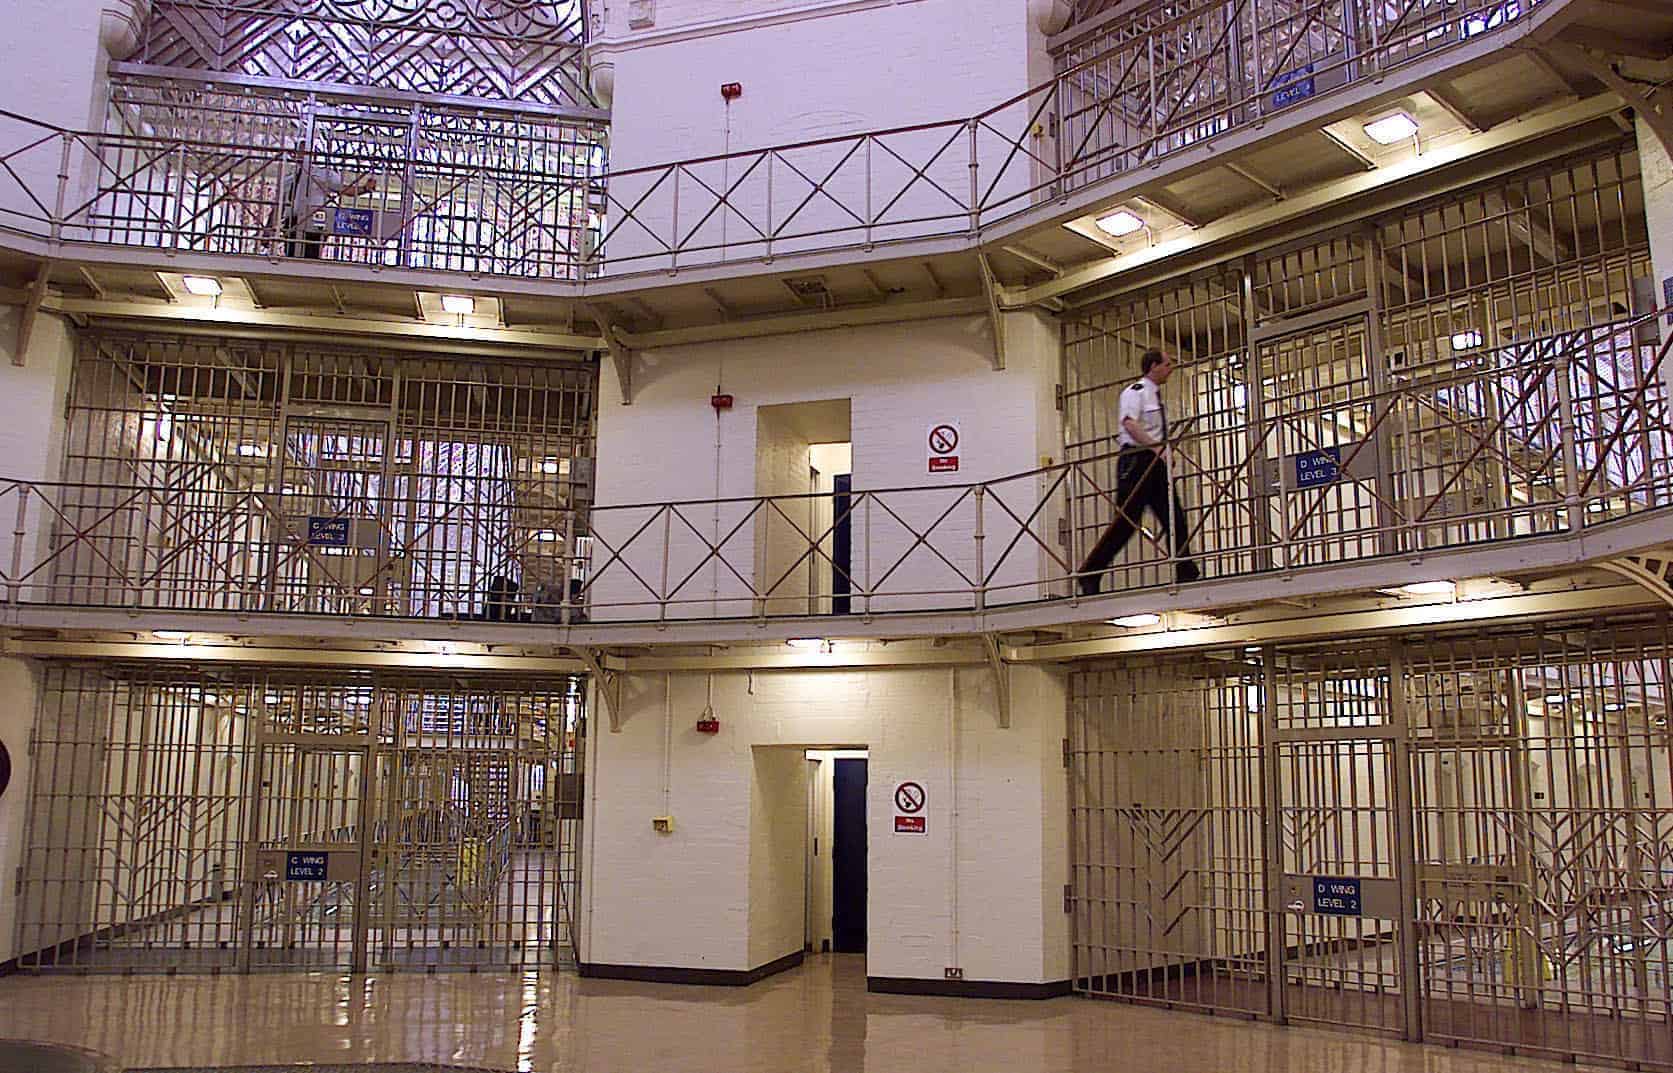 Government failing to address safety problems in prison – report